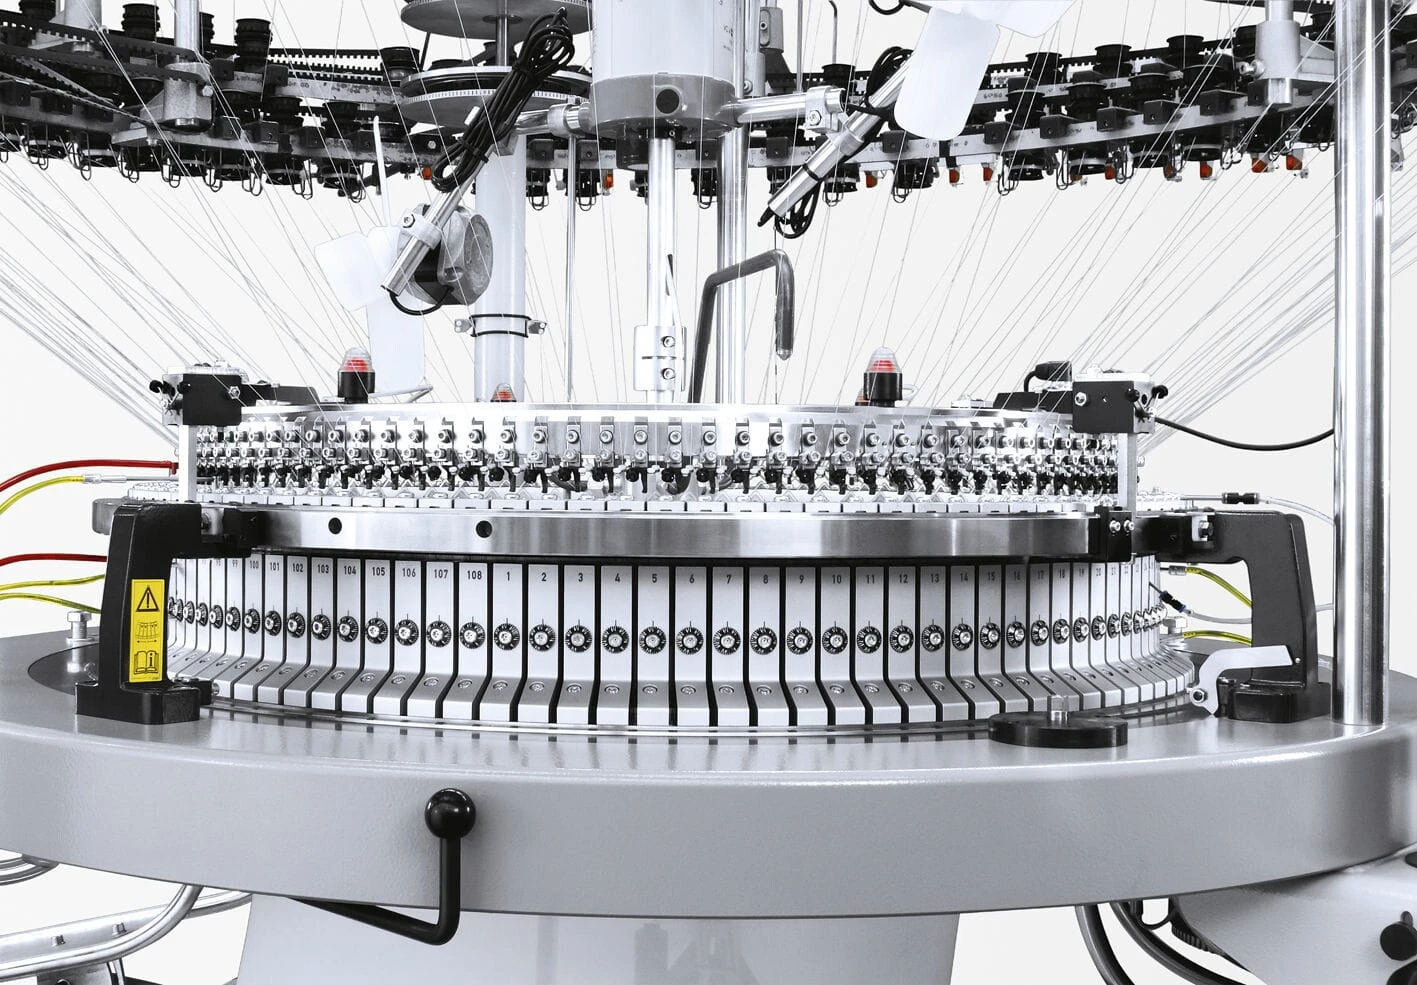 Basic Knowledge of Circular Knitting Machine You Should Know